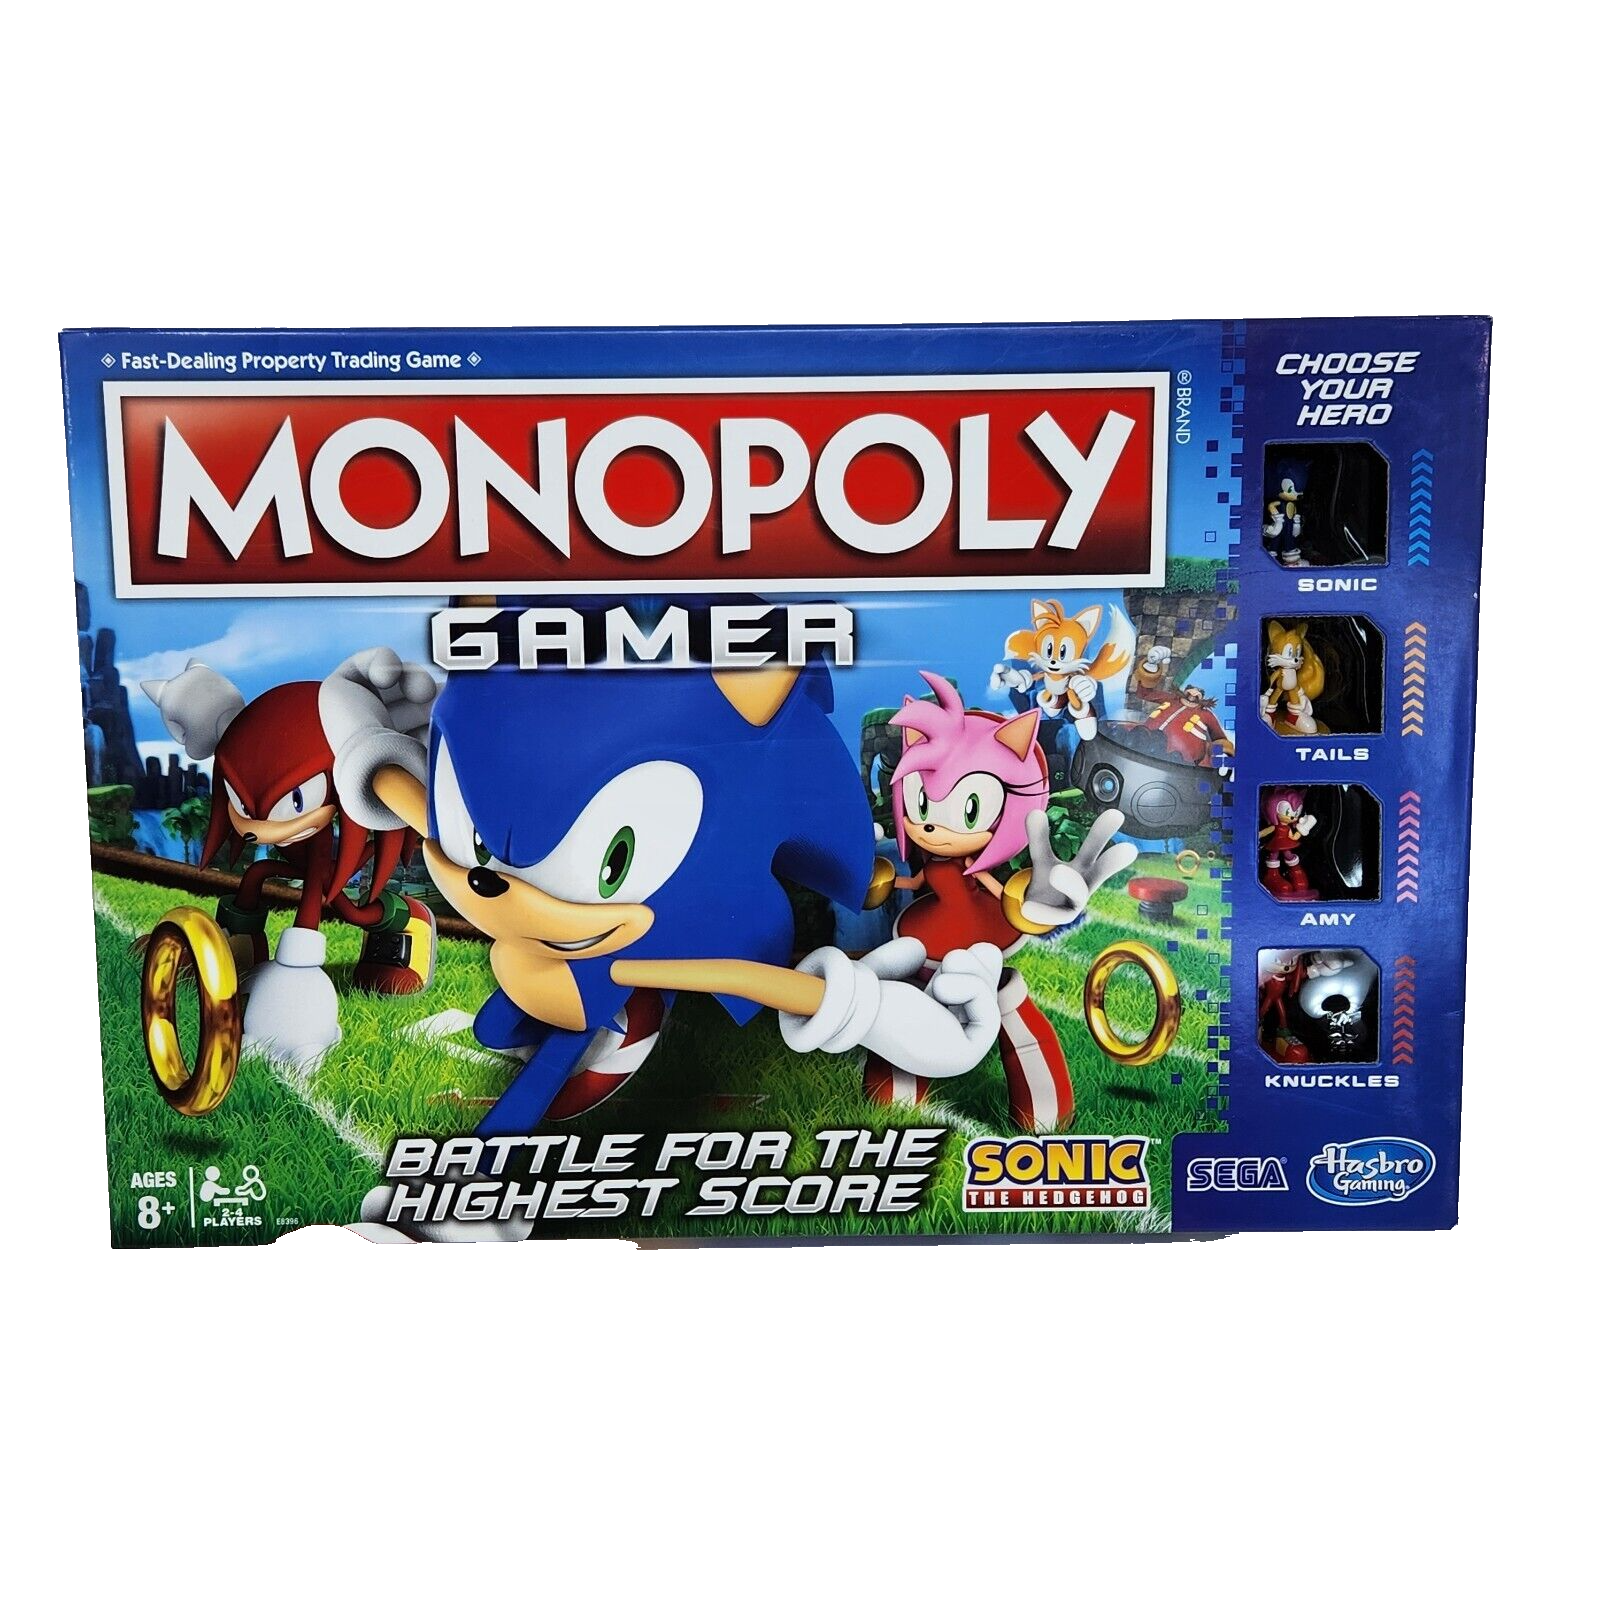 Primary image for MONOPOLY GAMER SONIC THE HEDGEHOG BOARD GAME 100% COMPLETE 2018